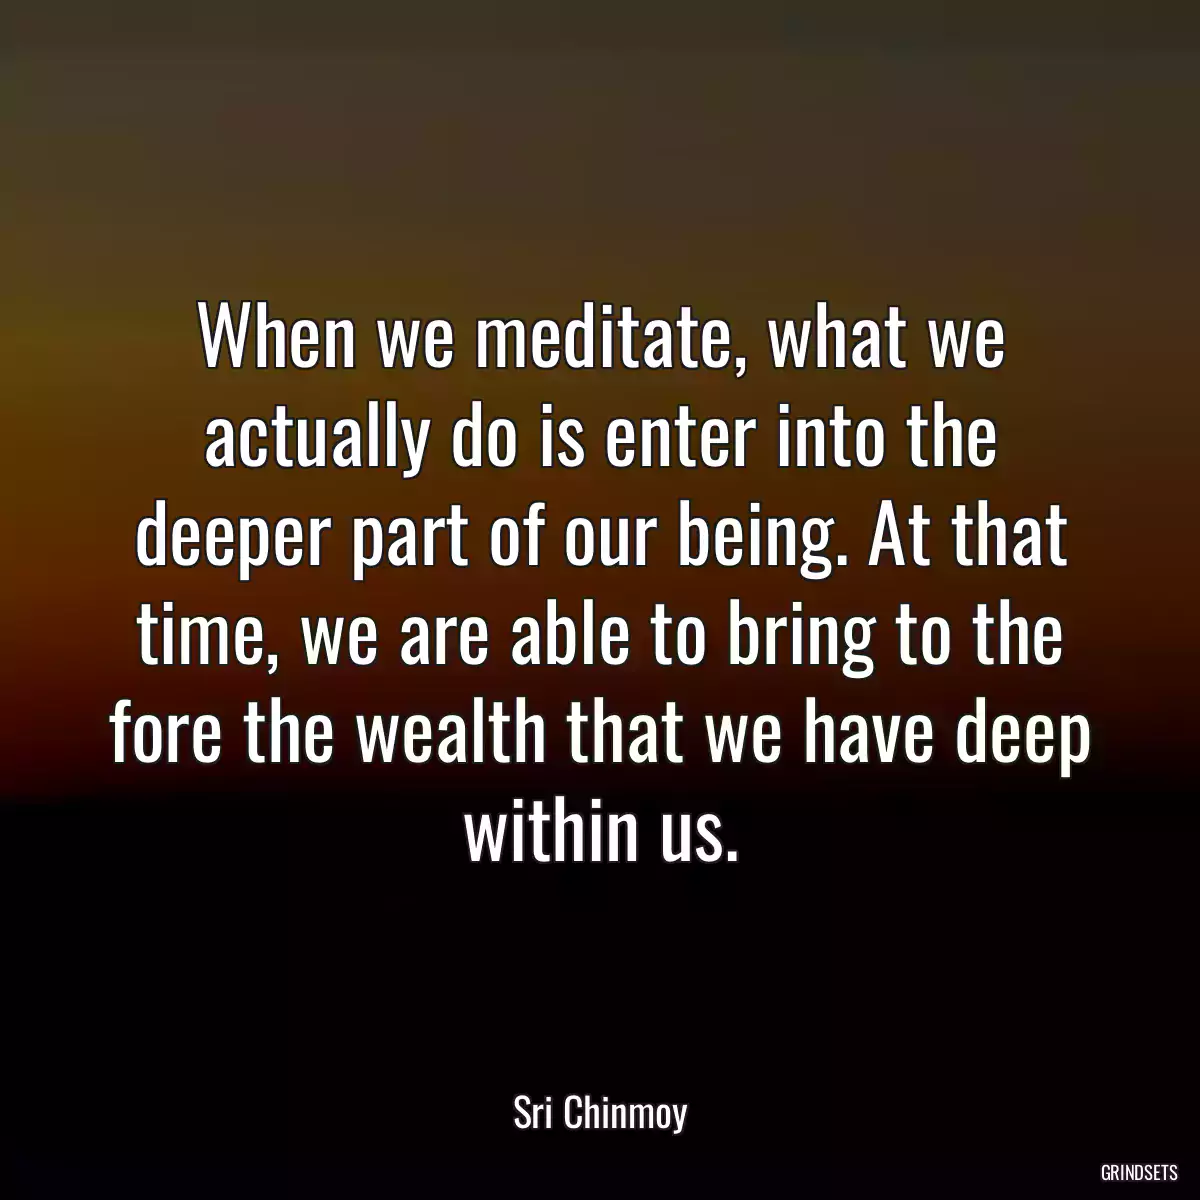 When we meditate, what we actually do is enter into the deeper part of our being. At that time, we are able to bring to the fore the wealth that we have deep within us.